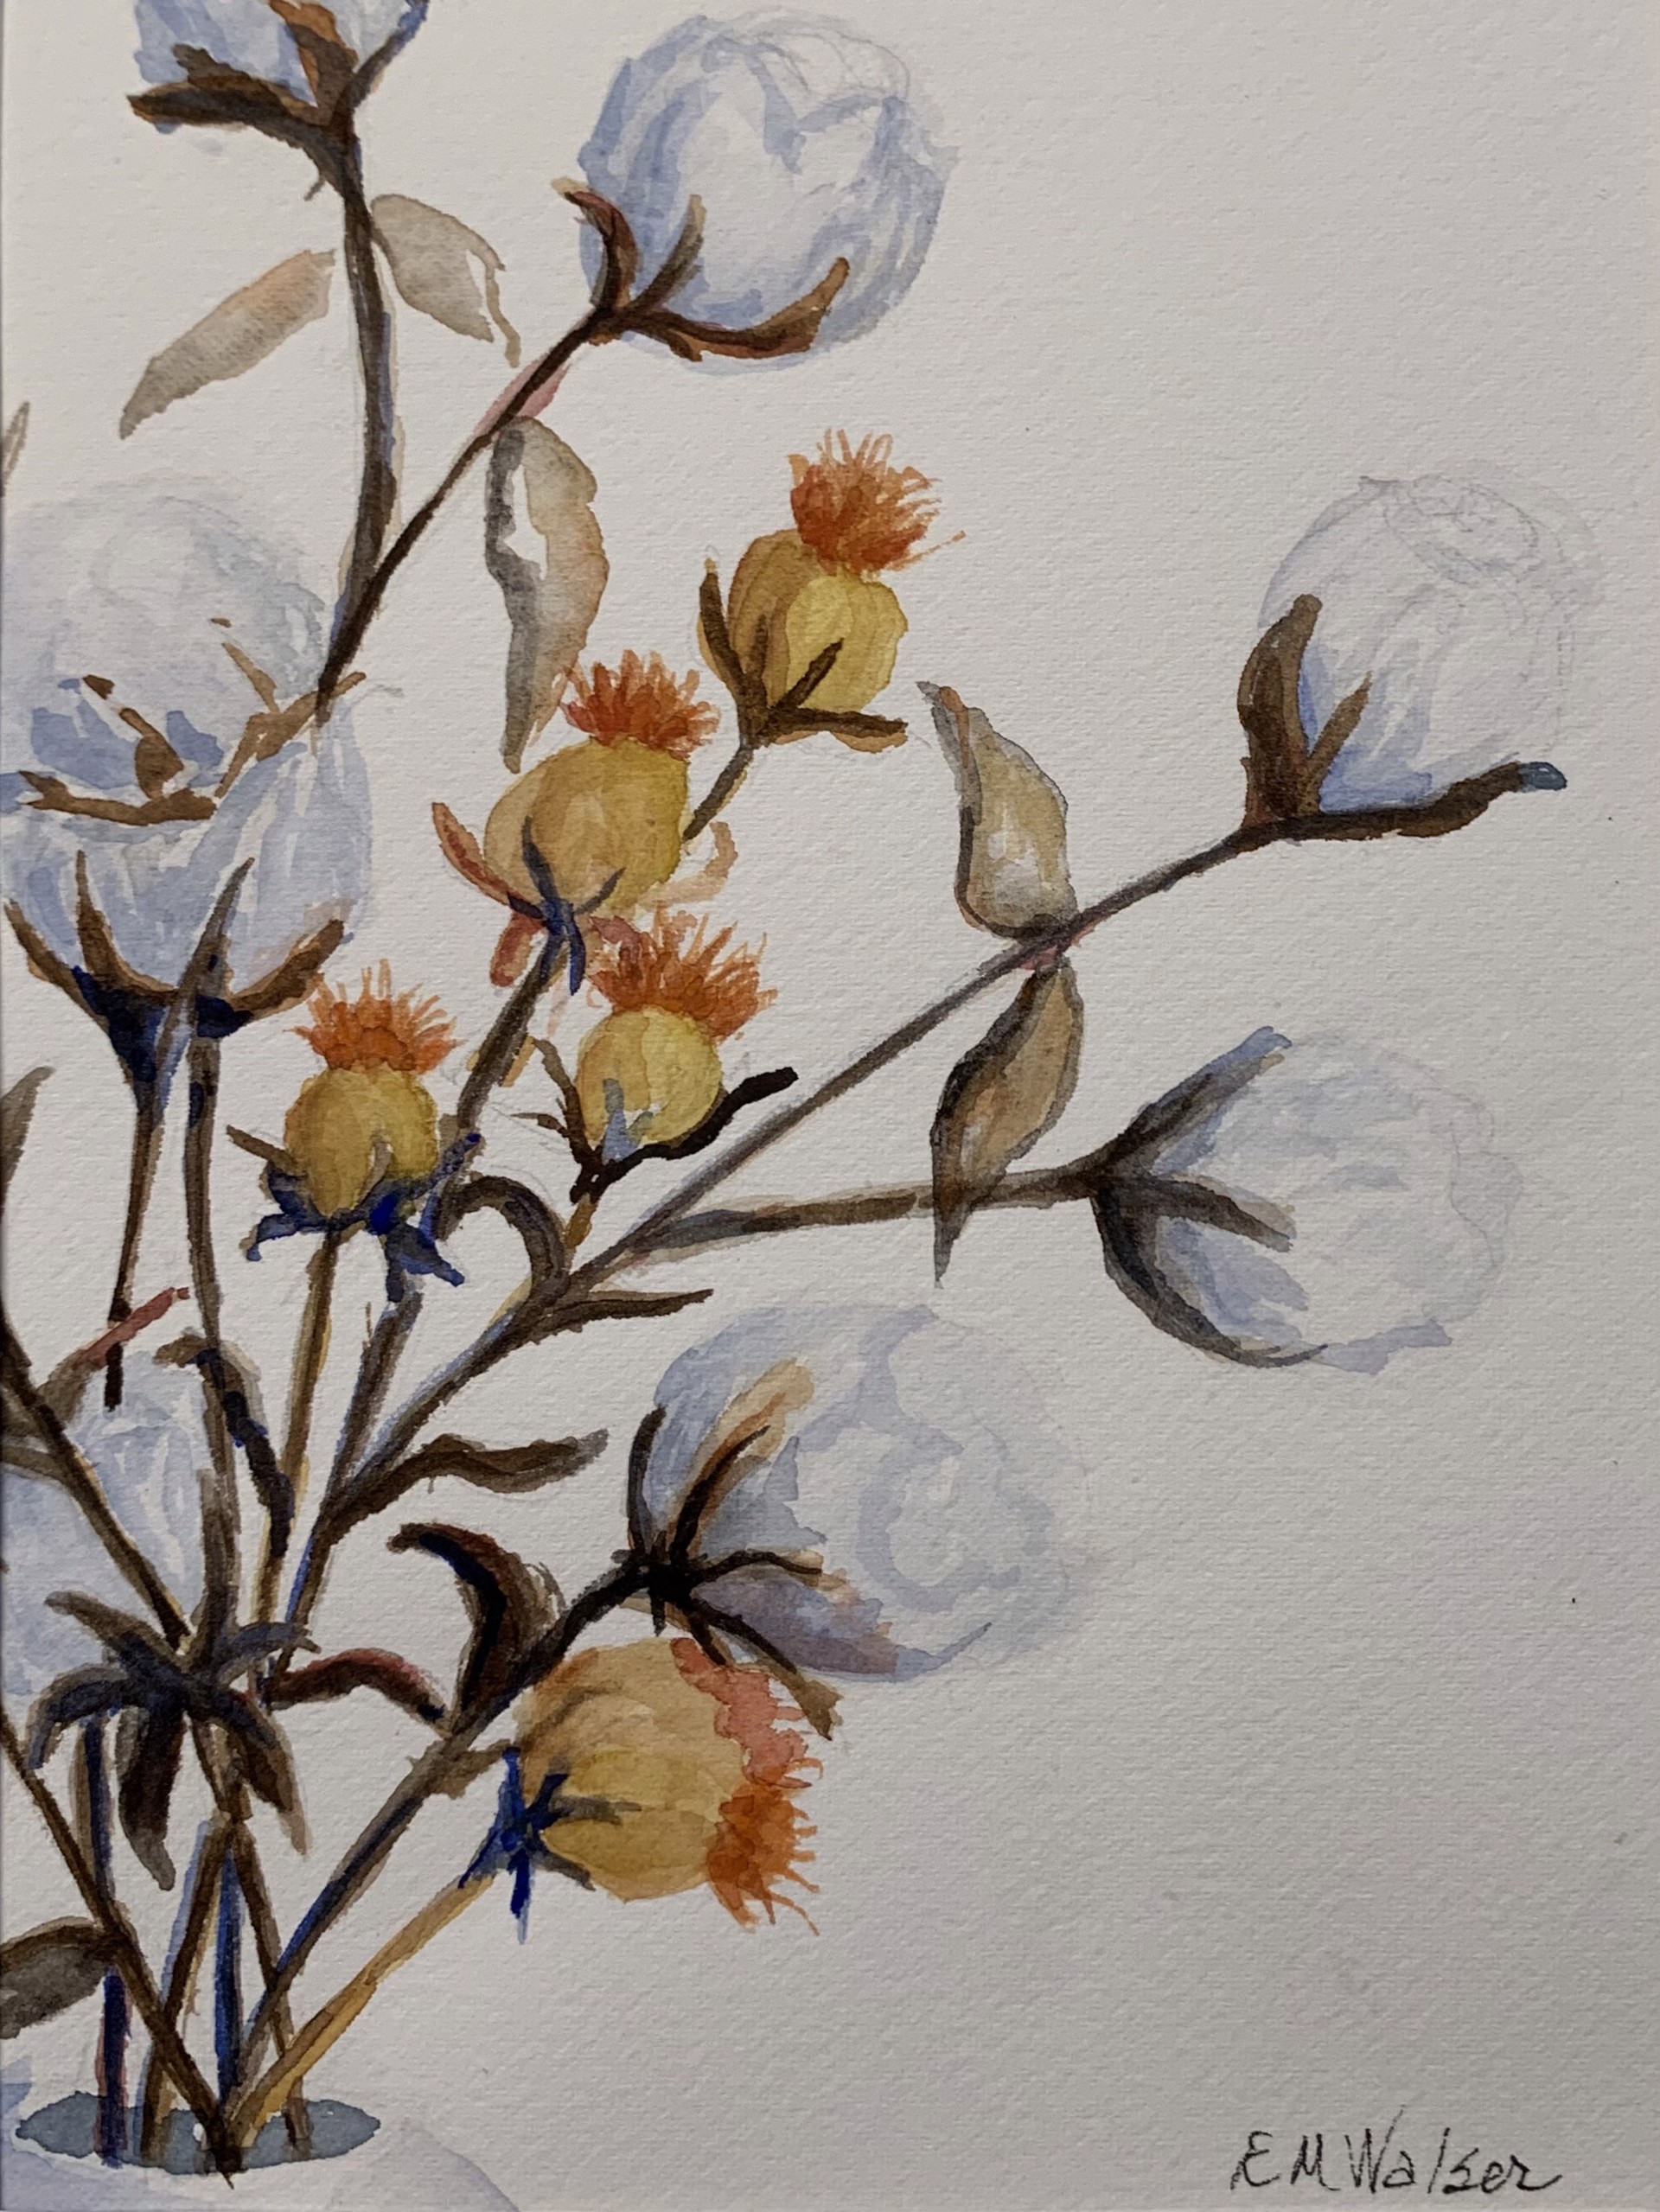 Cotton and Safflower by Betty Walser